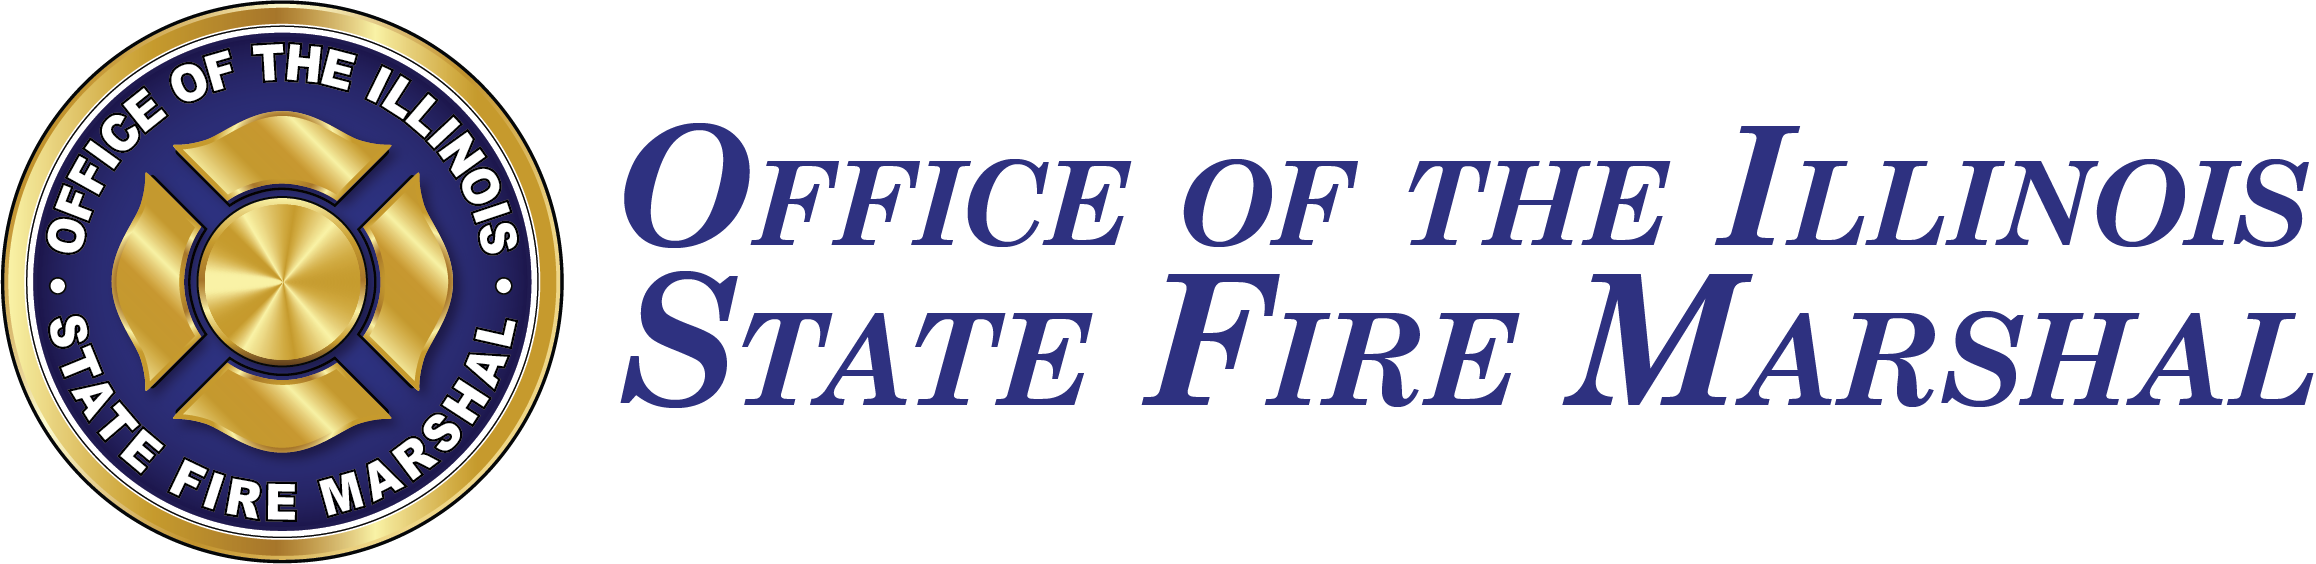 Office of the Illinois State FIre Marshal